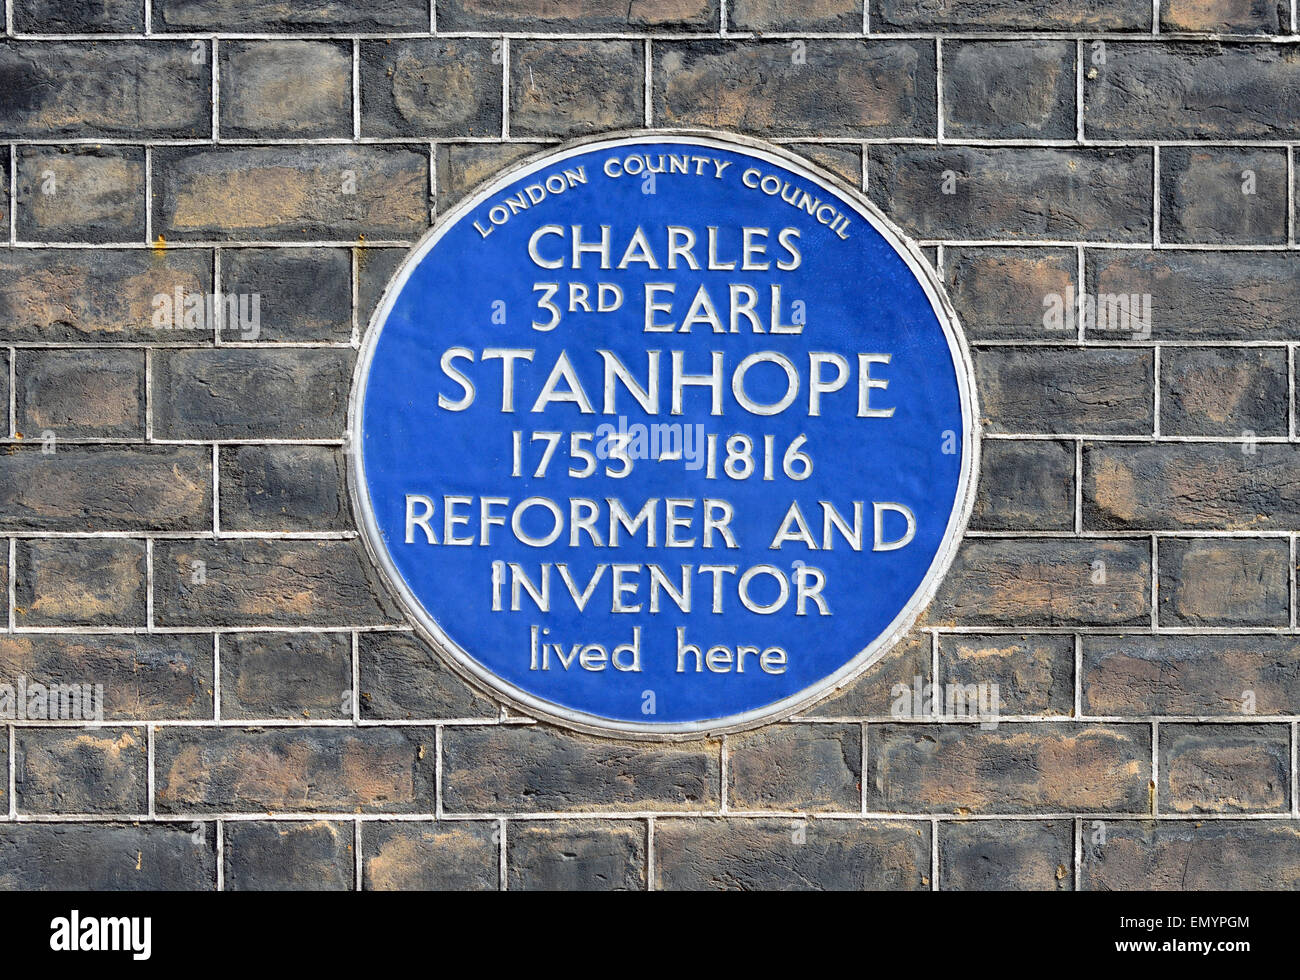 London, England, UK. Commemorative Blue Plaque: 'Charles 3rd Earl Stanhope 1753-1816 reformer and inventor lived here' Stock Photo